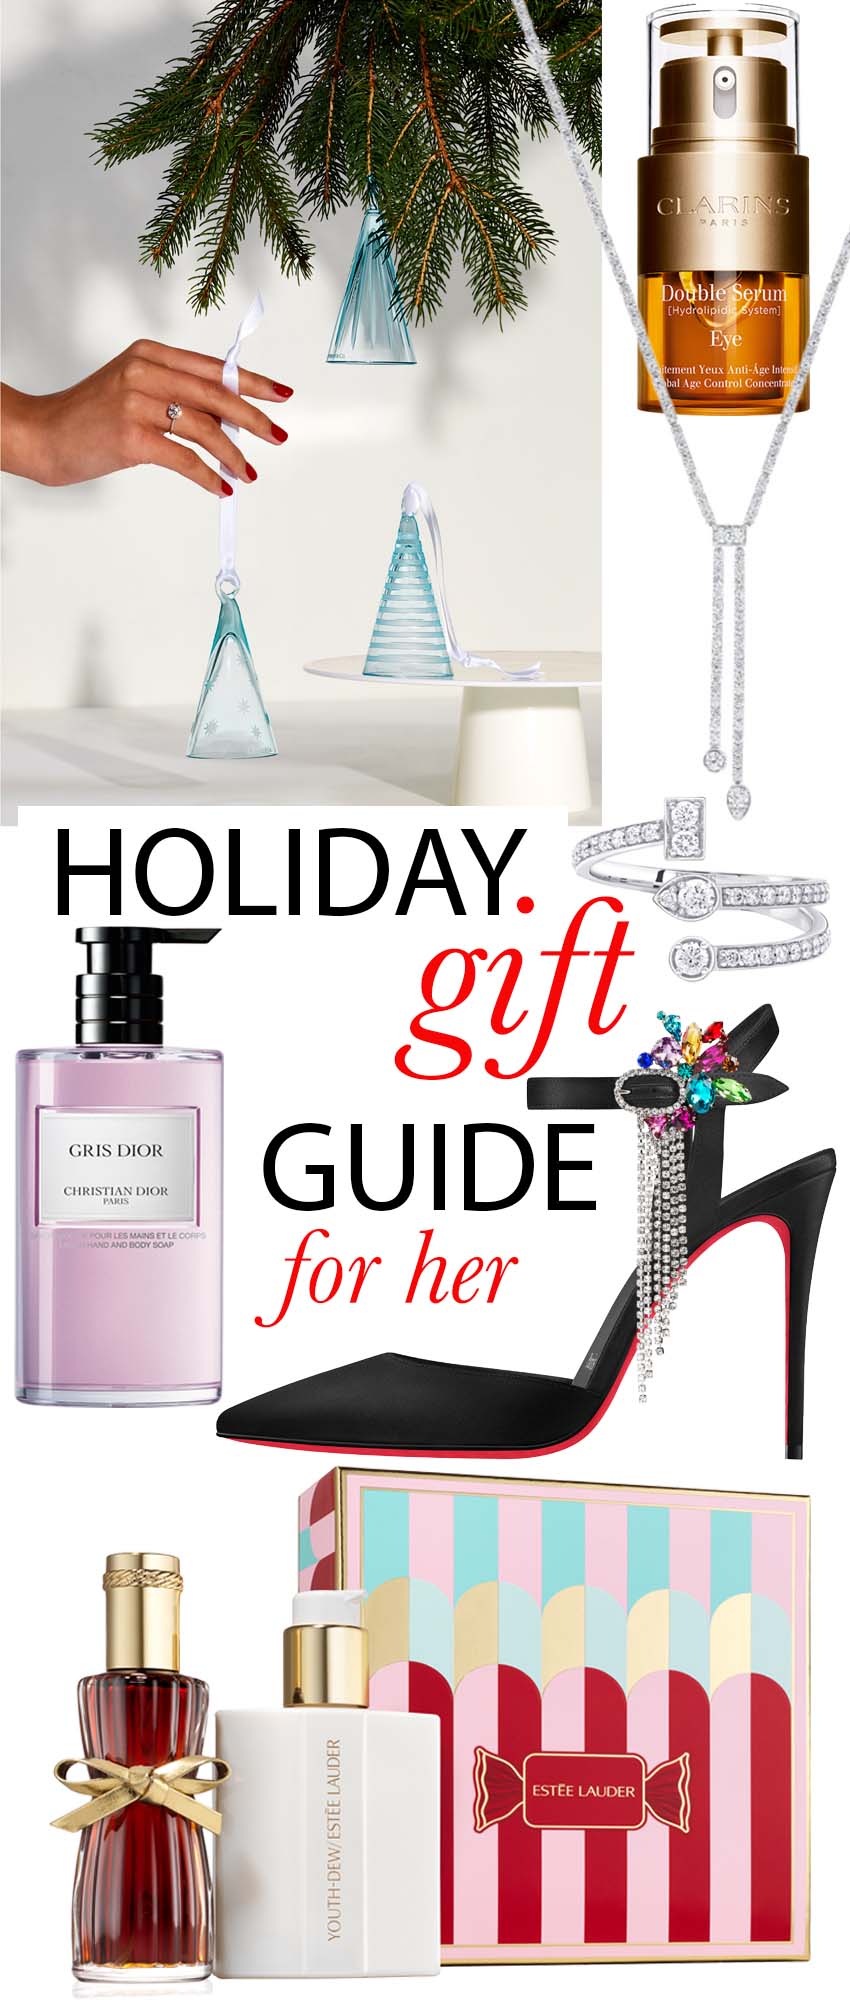 Holiday Gift Guide for Her in Perfect Wedding Magazine